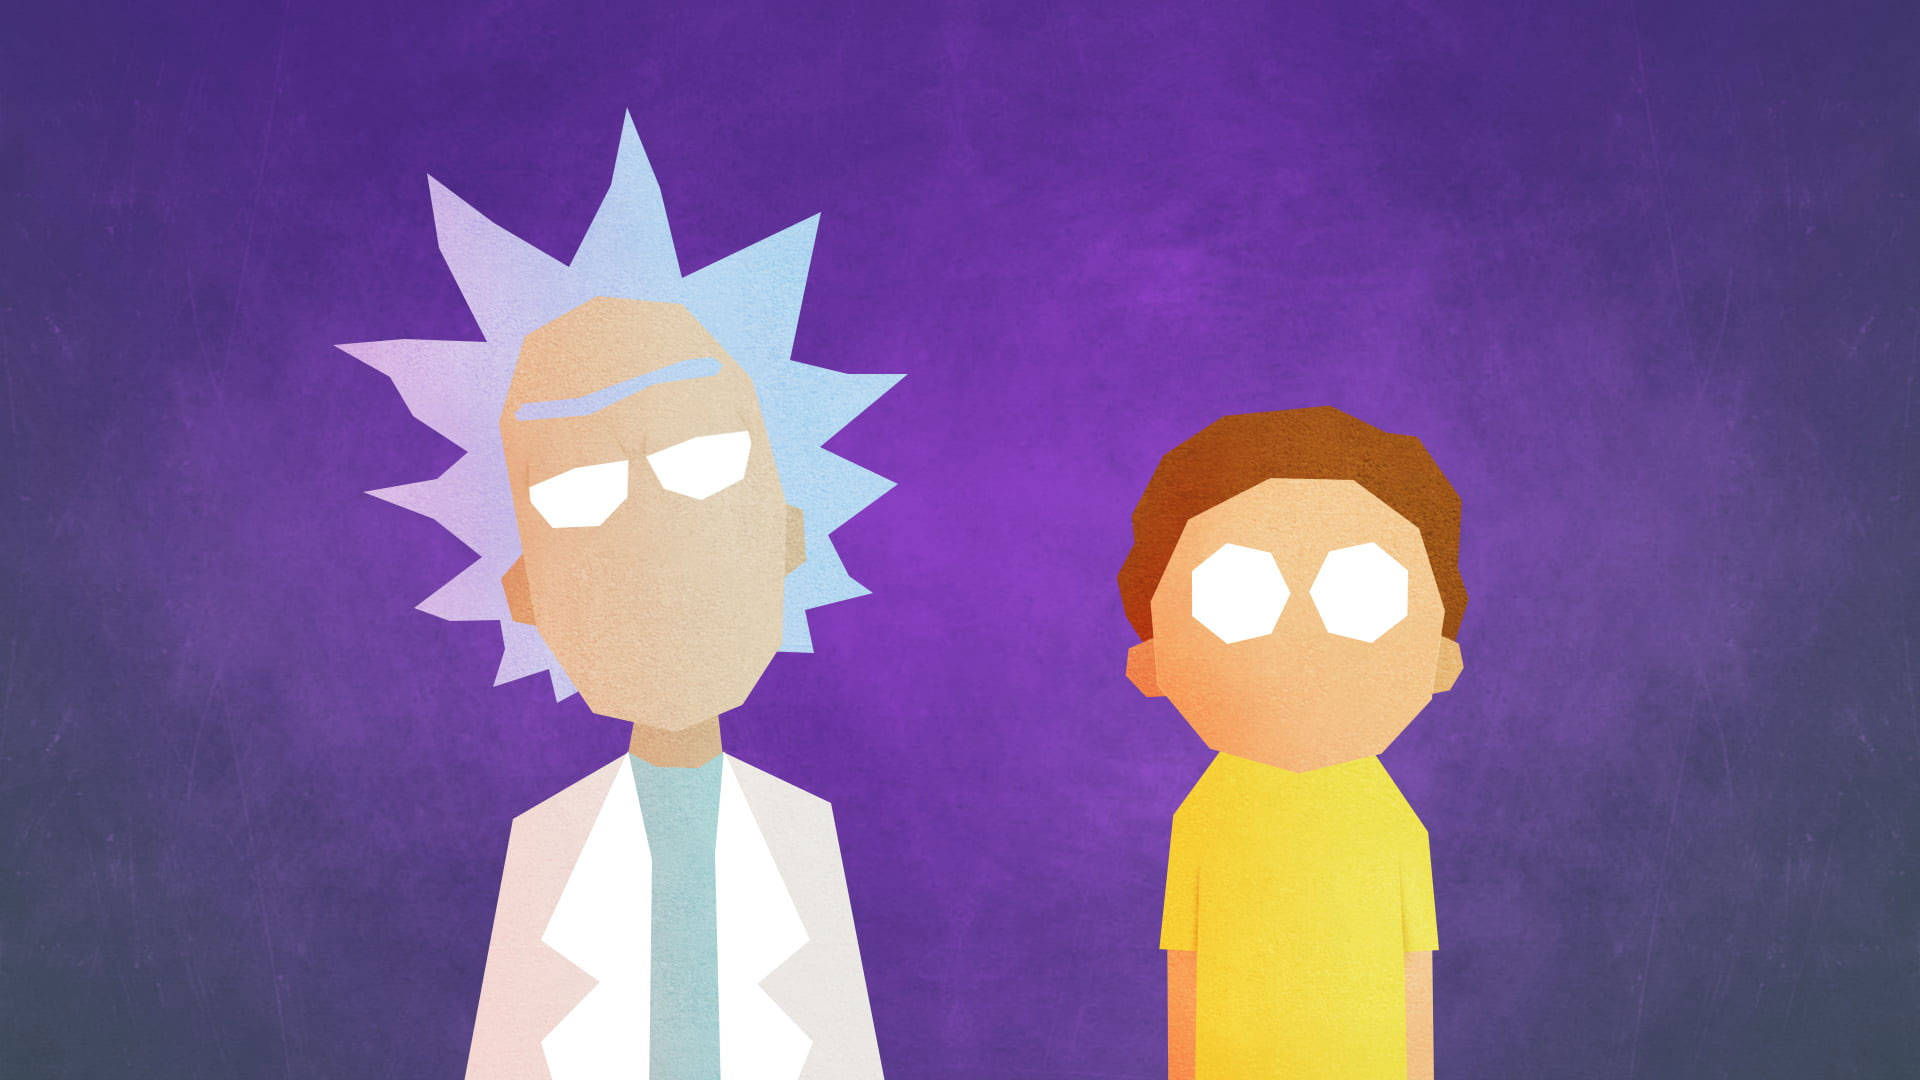 Rise and shine with Rick Sanchez! Wallpaper